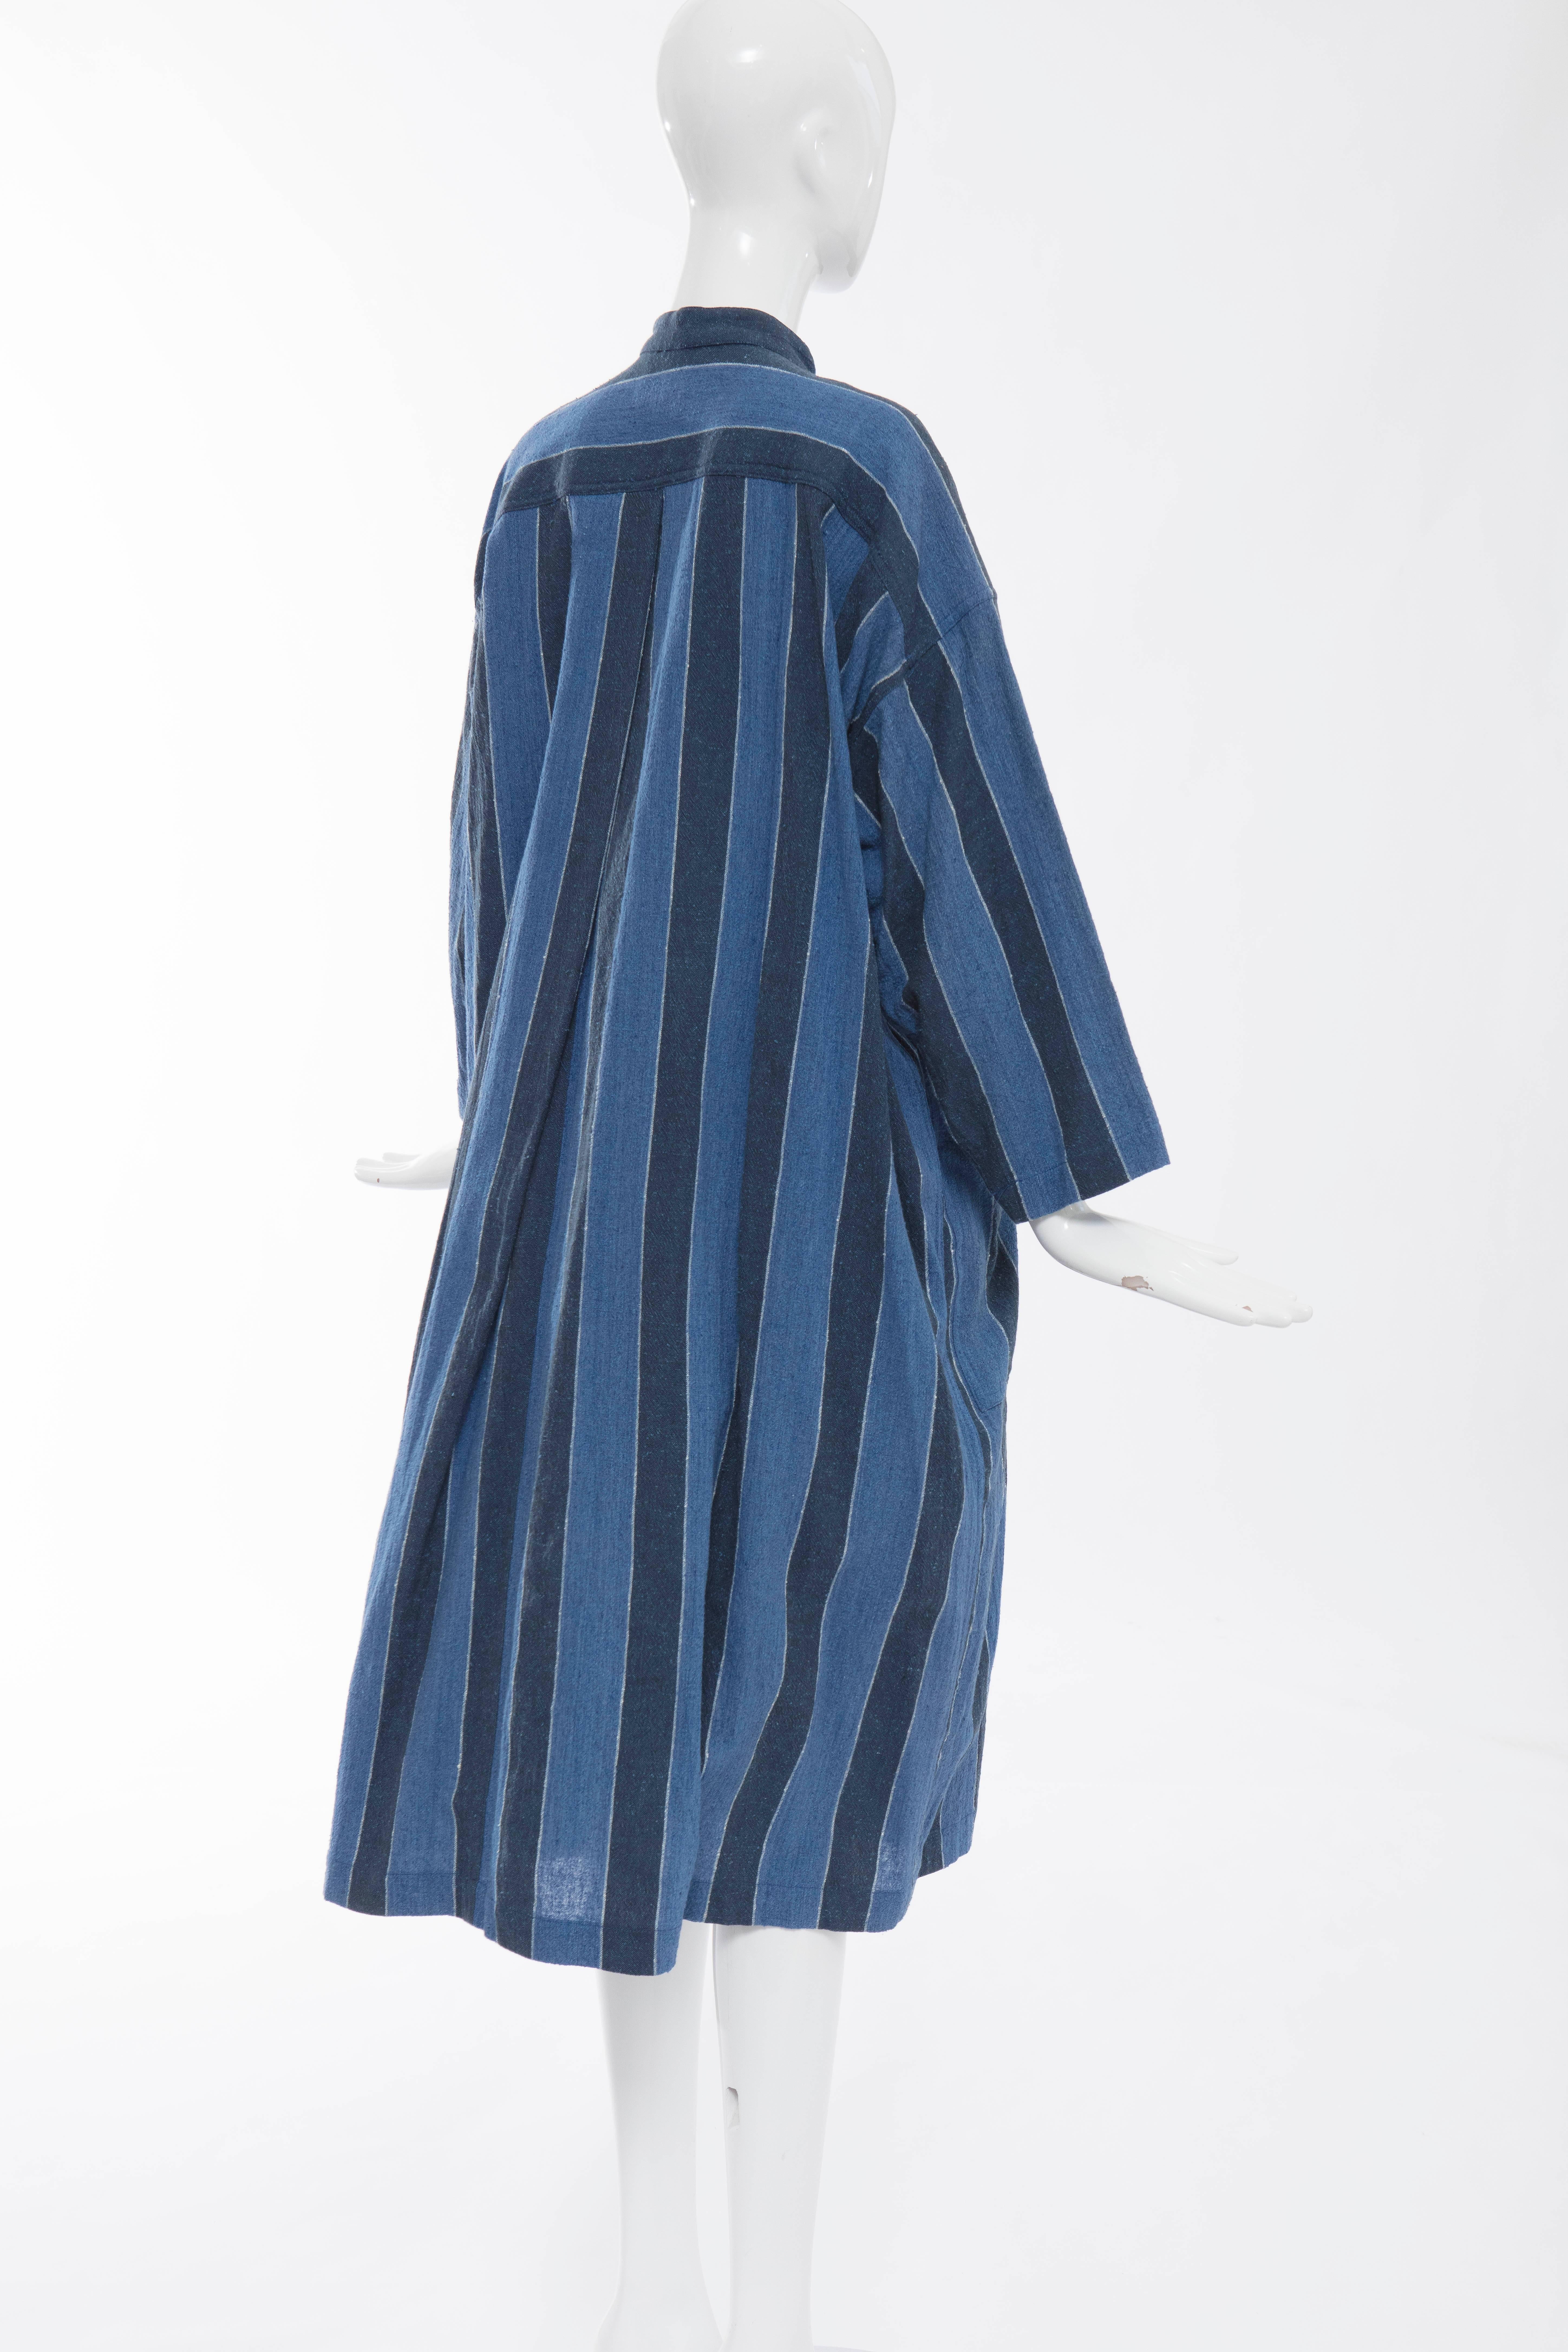 Issey Miyake Plantation Woven Cotton Button Front Dress, Circa 1980's For Sale 2